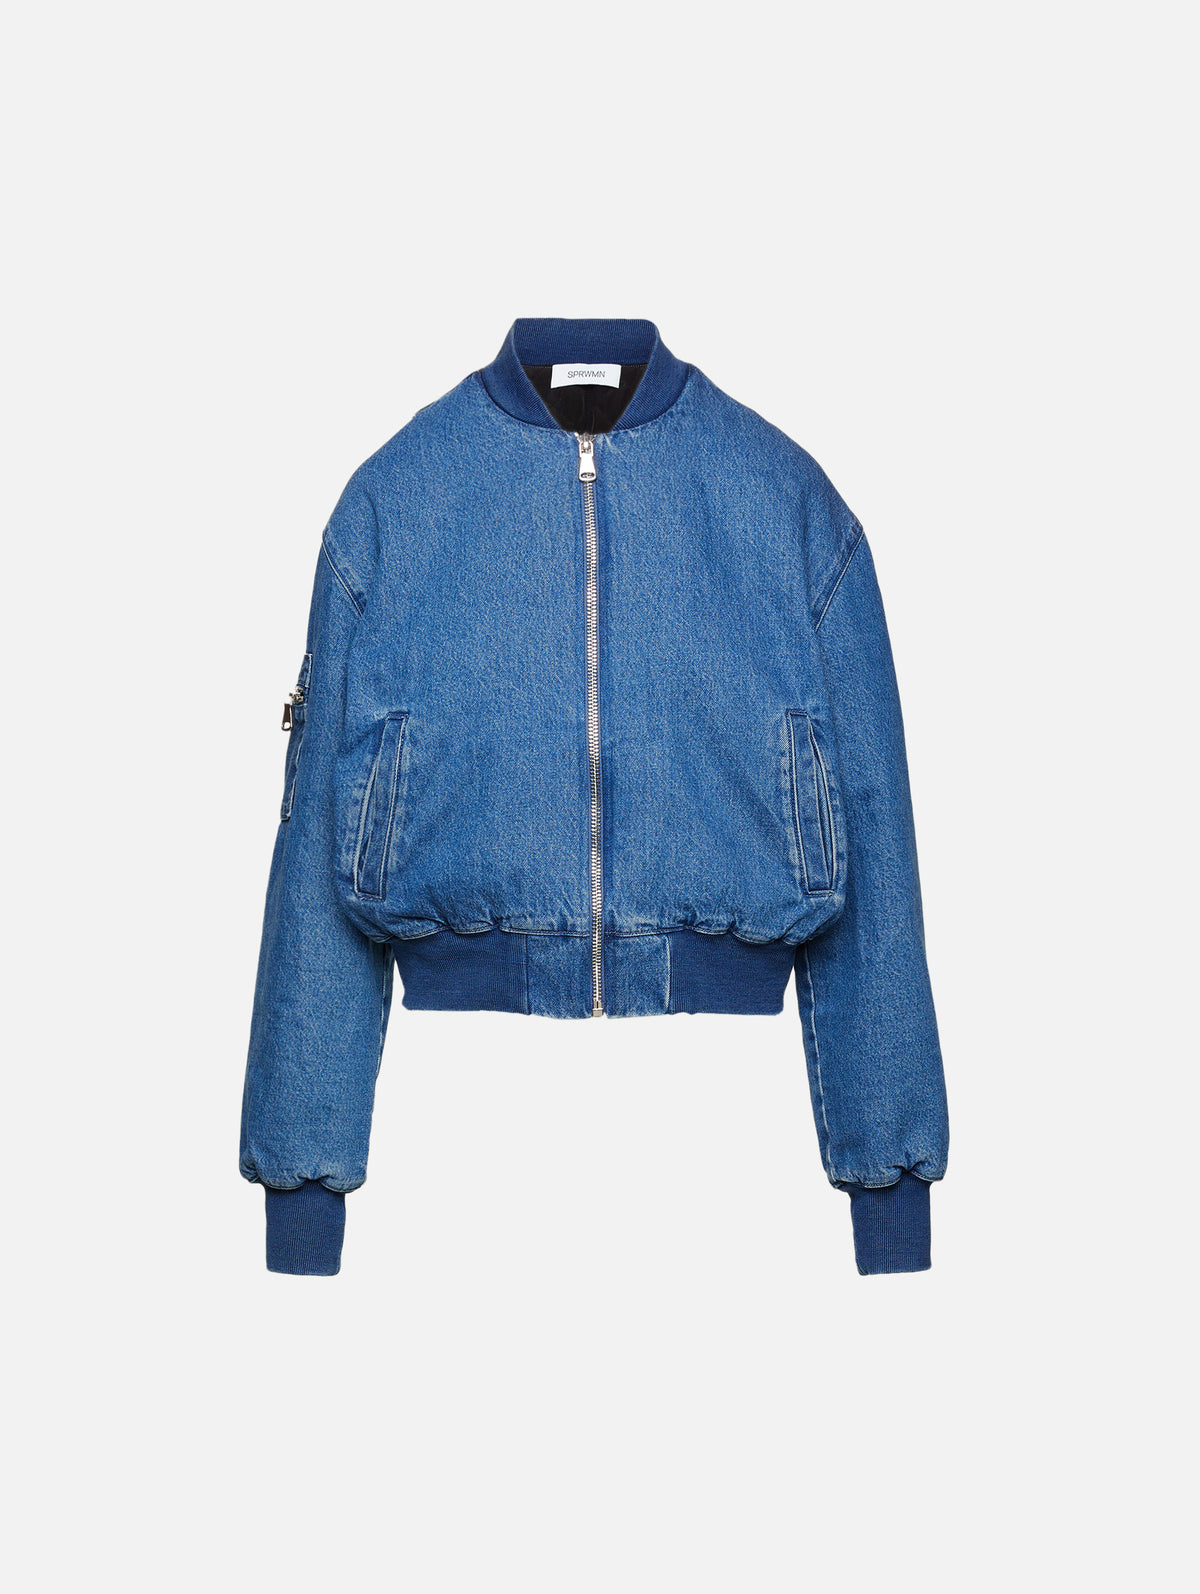 view 1 - Bomber Jacket